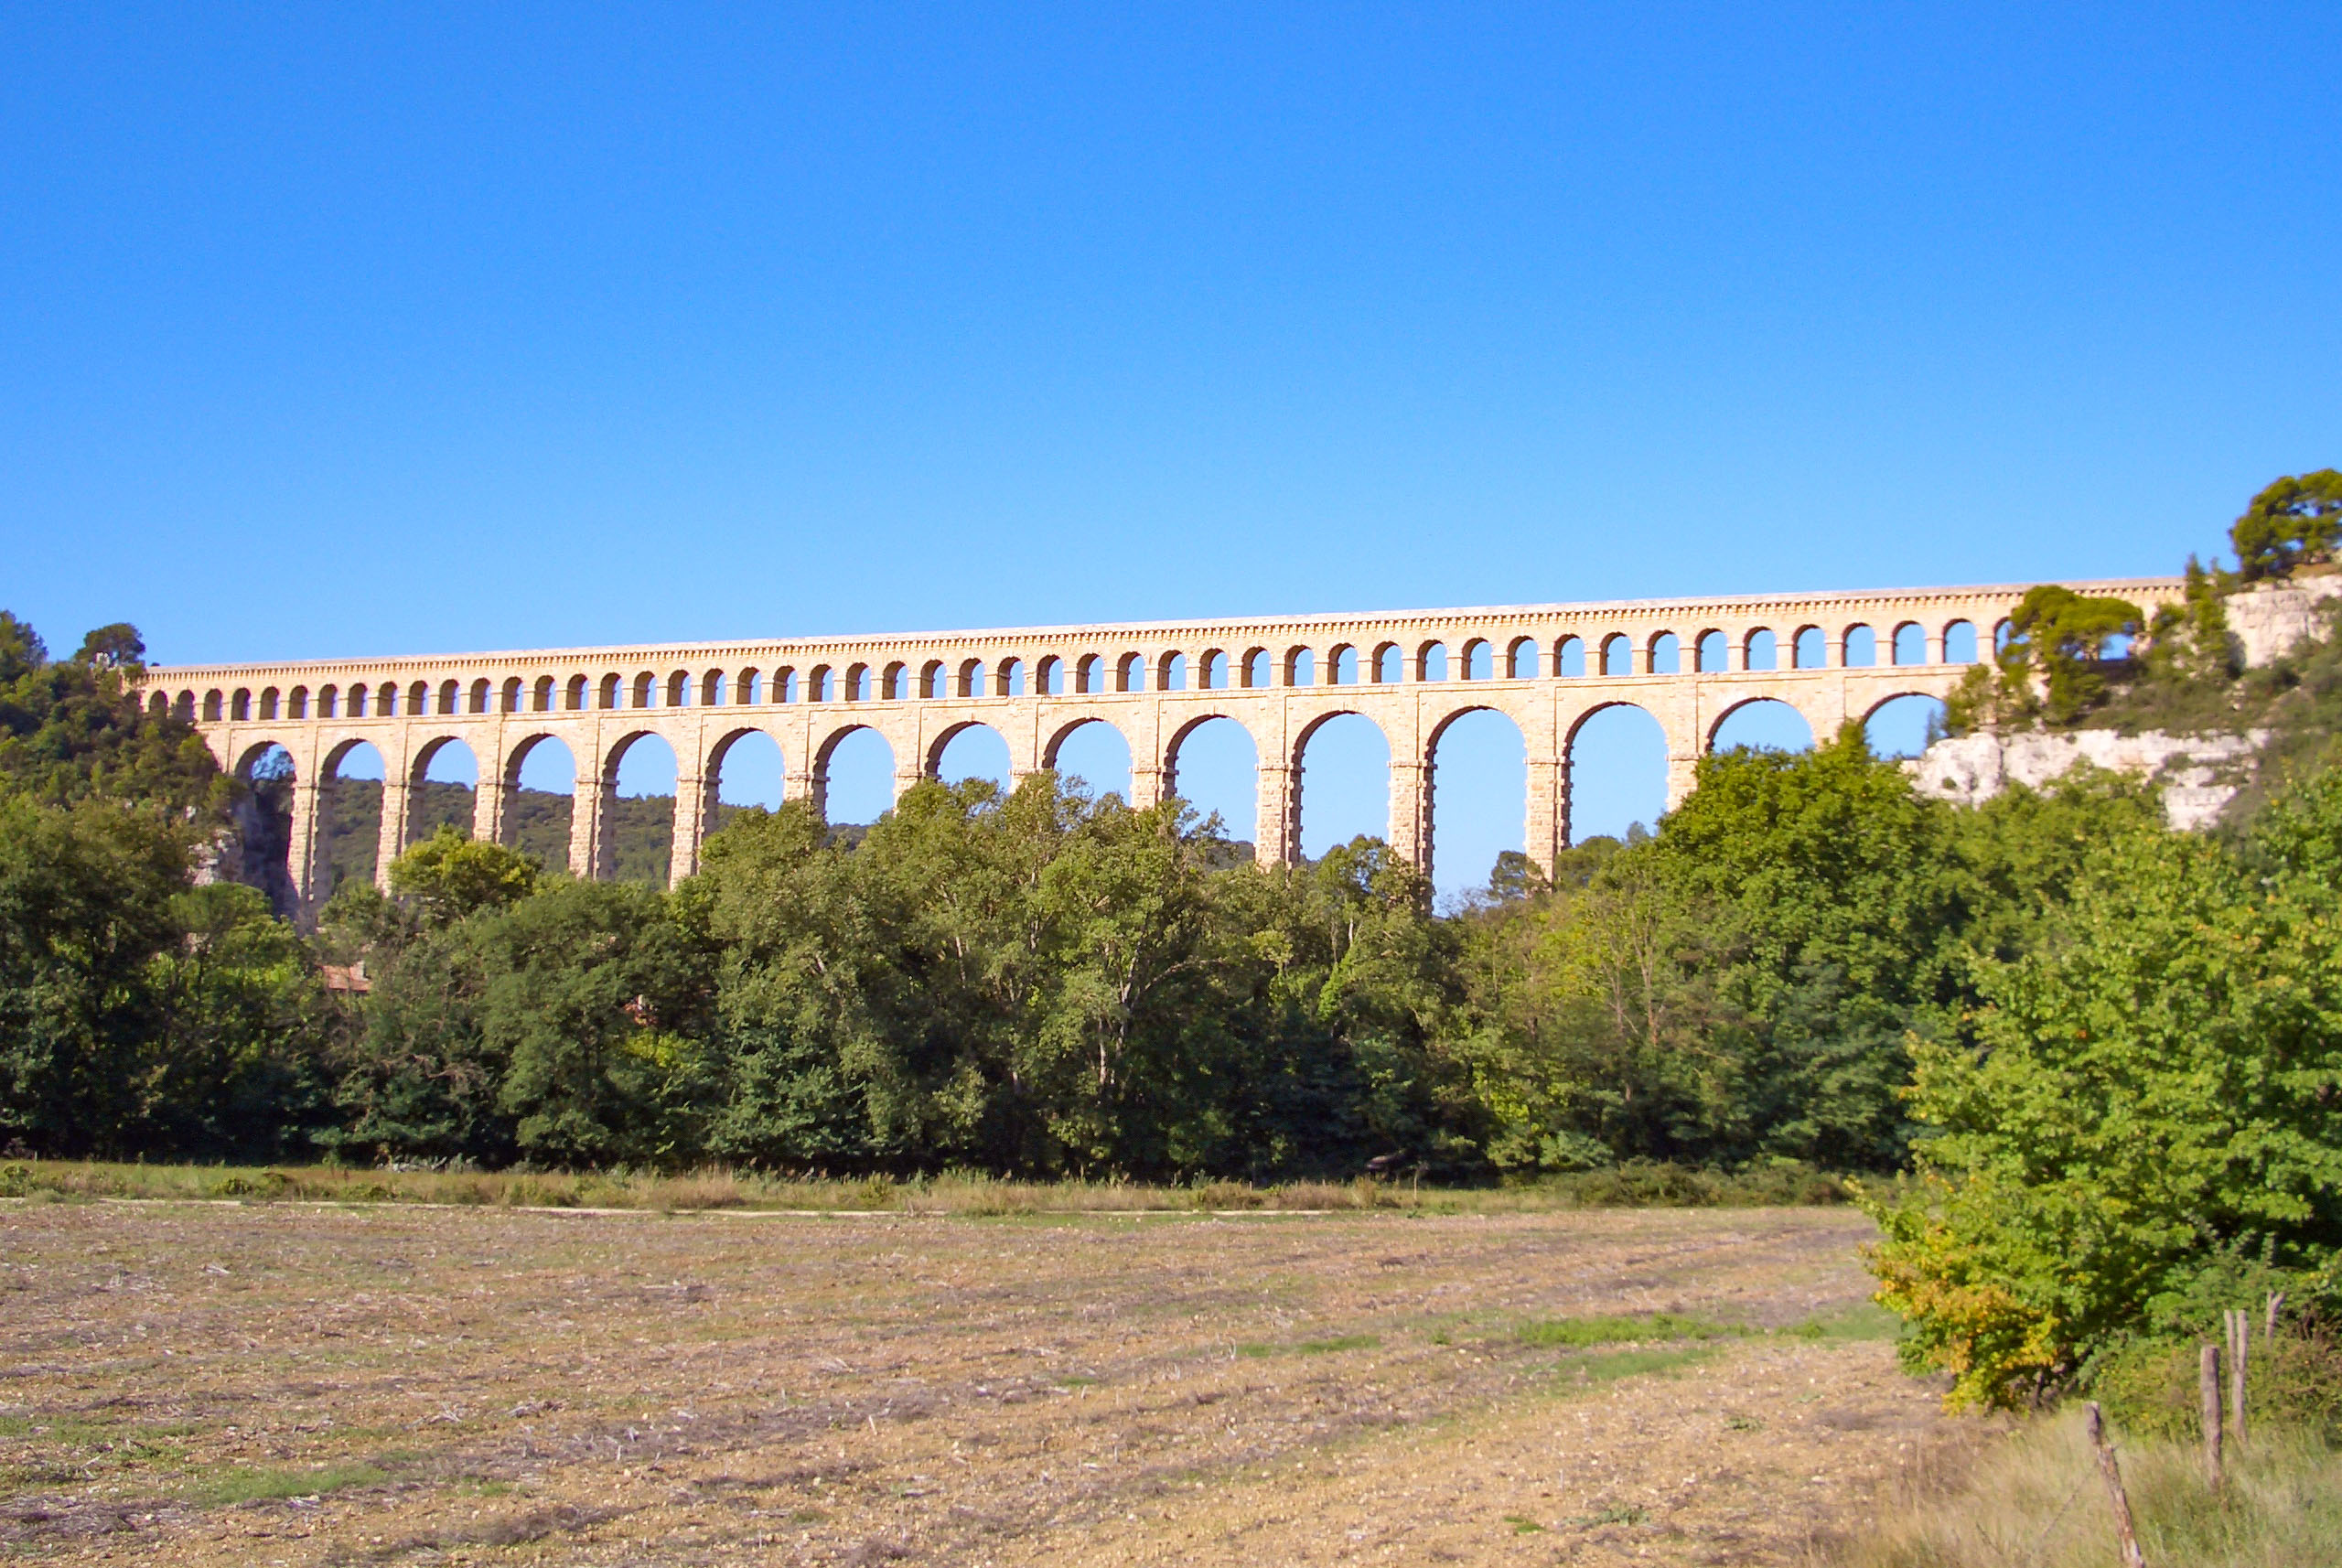 Around Aix-en-Provence - Roquefavour aqueduct © Allie Caulfield - licence [CC BY 2.0] from Wikimedia Commons